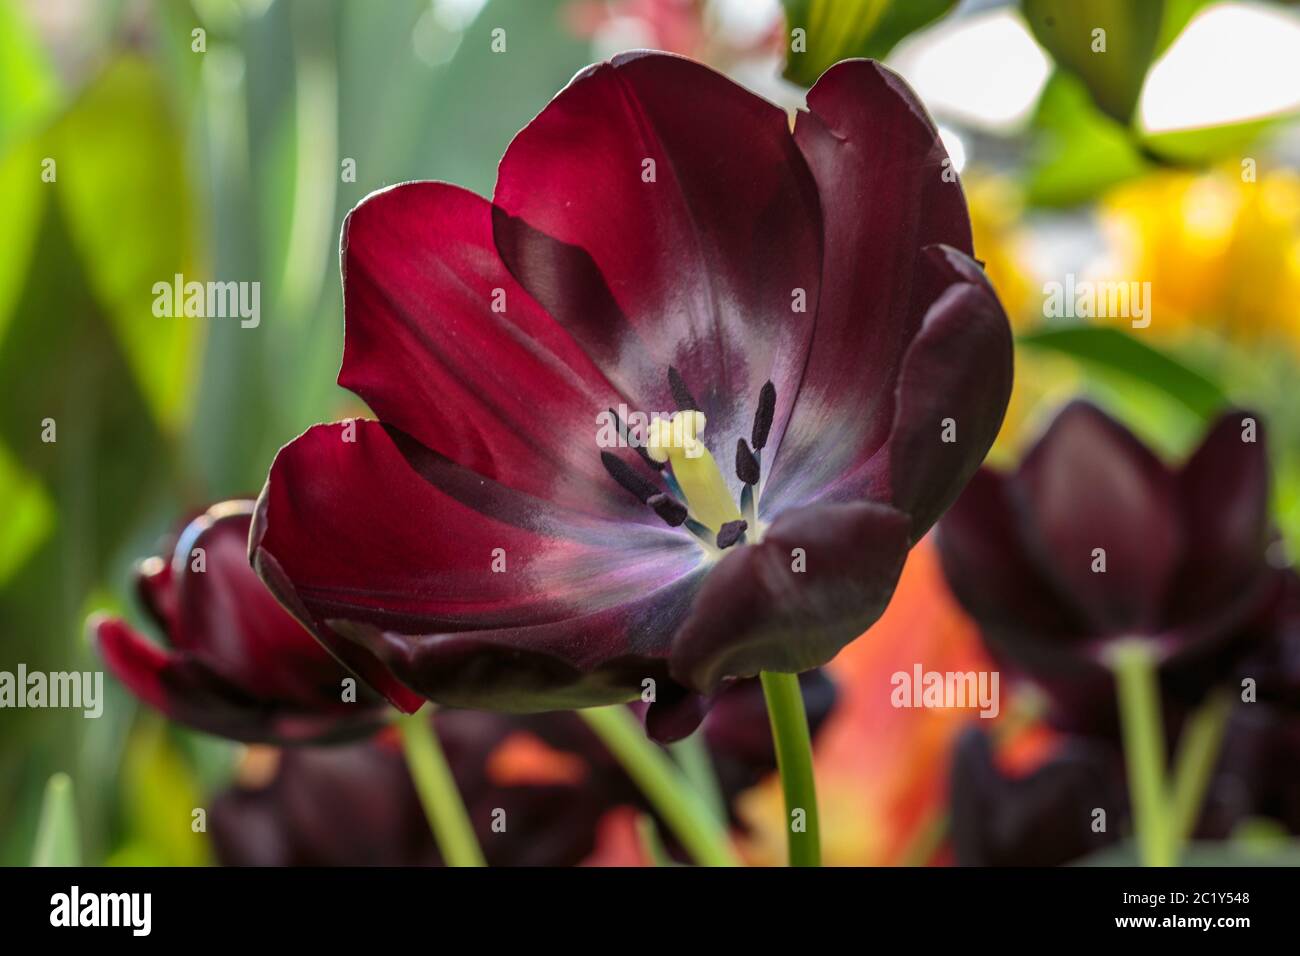 Black Tulip Flower Spring Garden Background Beautiful Tulips Growing At Field Queen Of The Night Tulips Otherwise Known As B Stock Photo Alamy